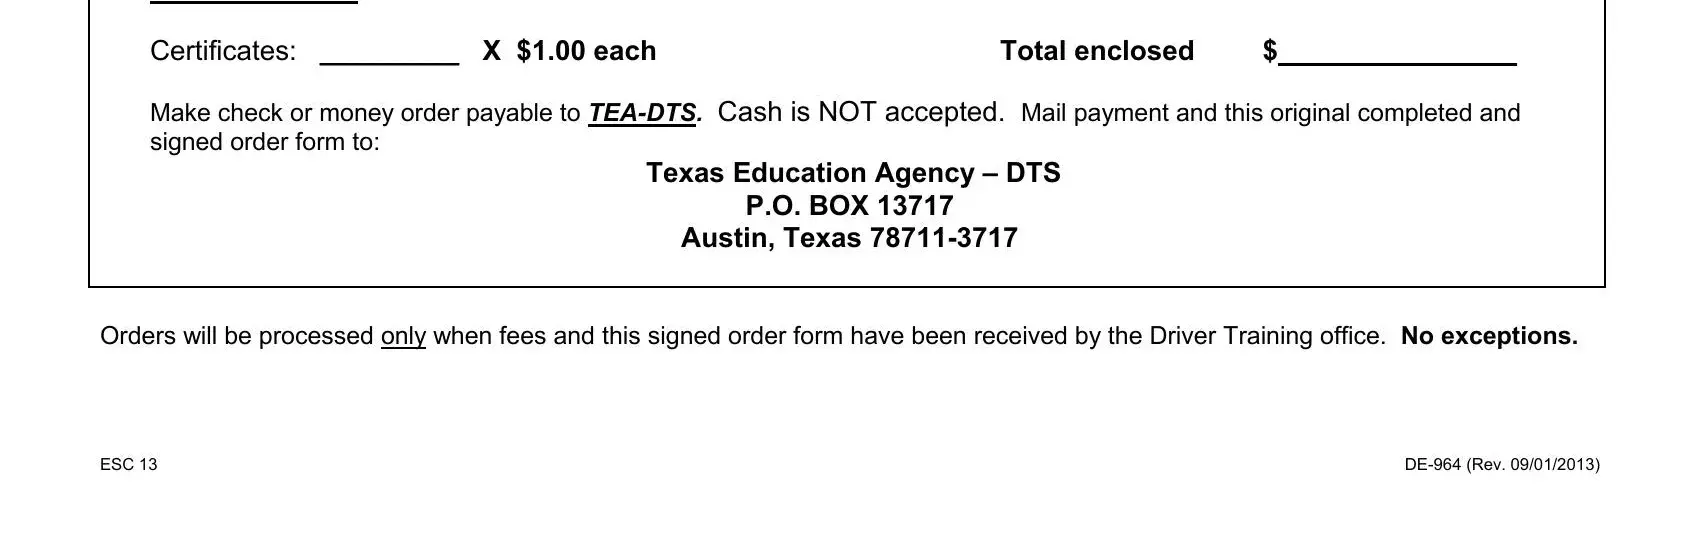 de964 form MAIL-IN ORDERS Certificates:, Total enclosed, Texas Education Agency – DTS, Austin, Orders will be processed only when, ESC 13, and DE-964 (Rev blanks to insert